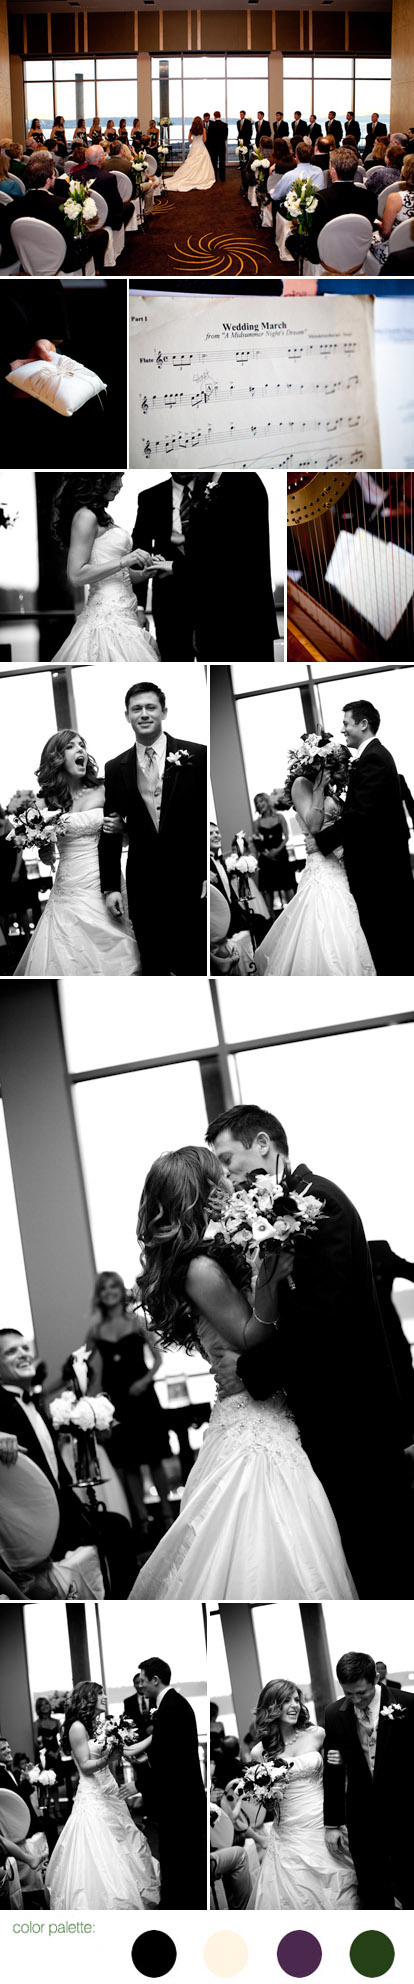 Modern Seattle wedding at the new Four Seasons Hotel, forgotten kiss during the ceremony, images by La Vie Photography